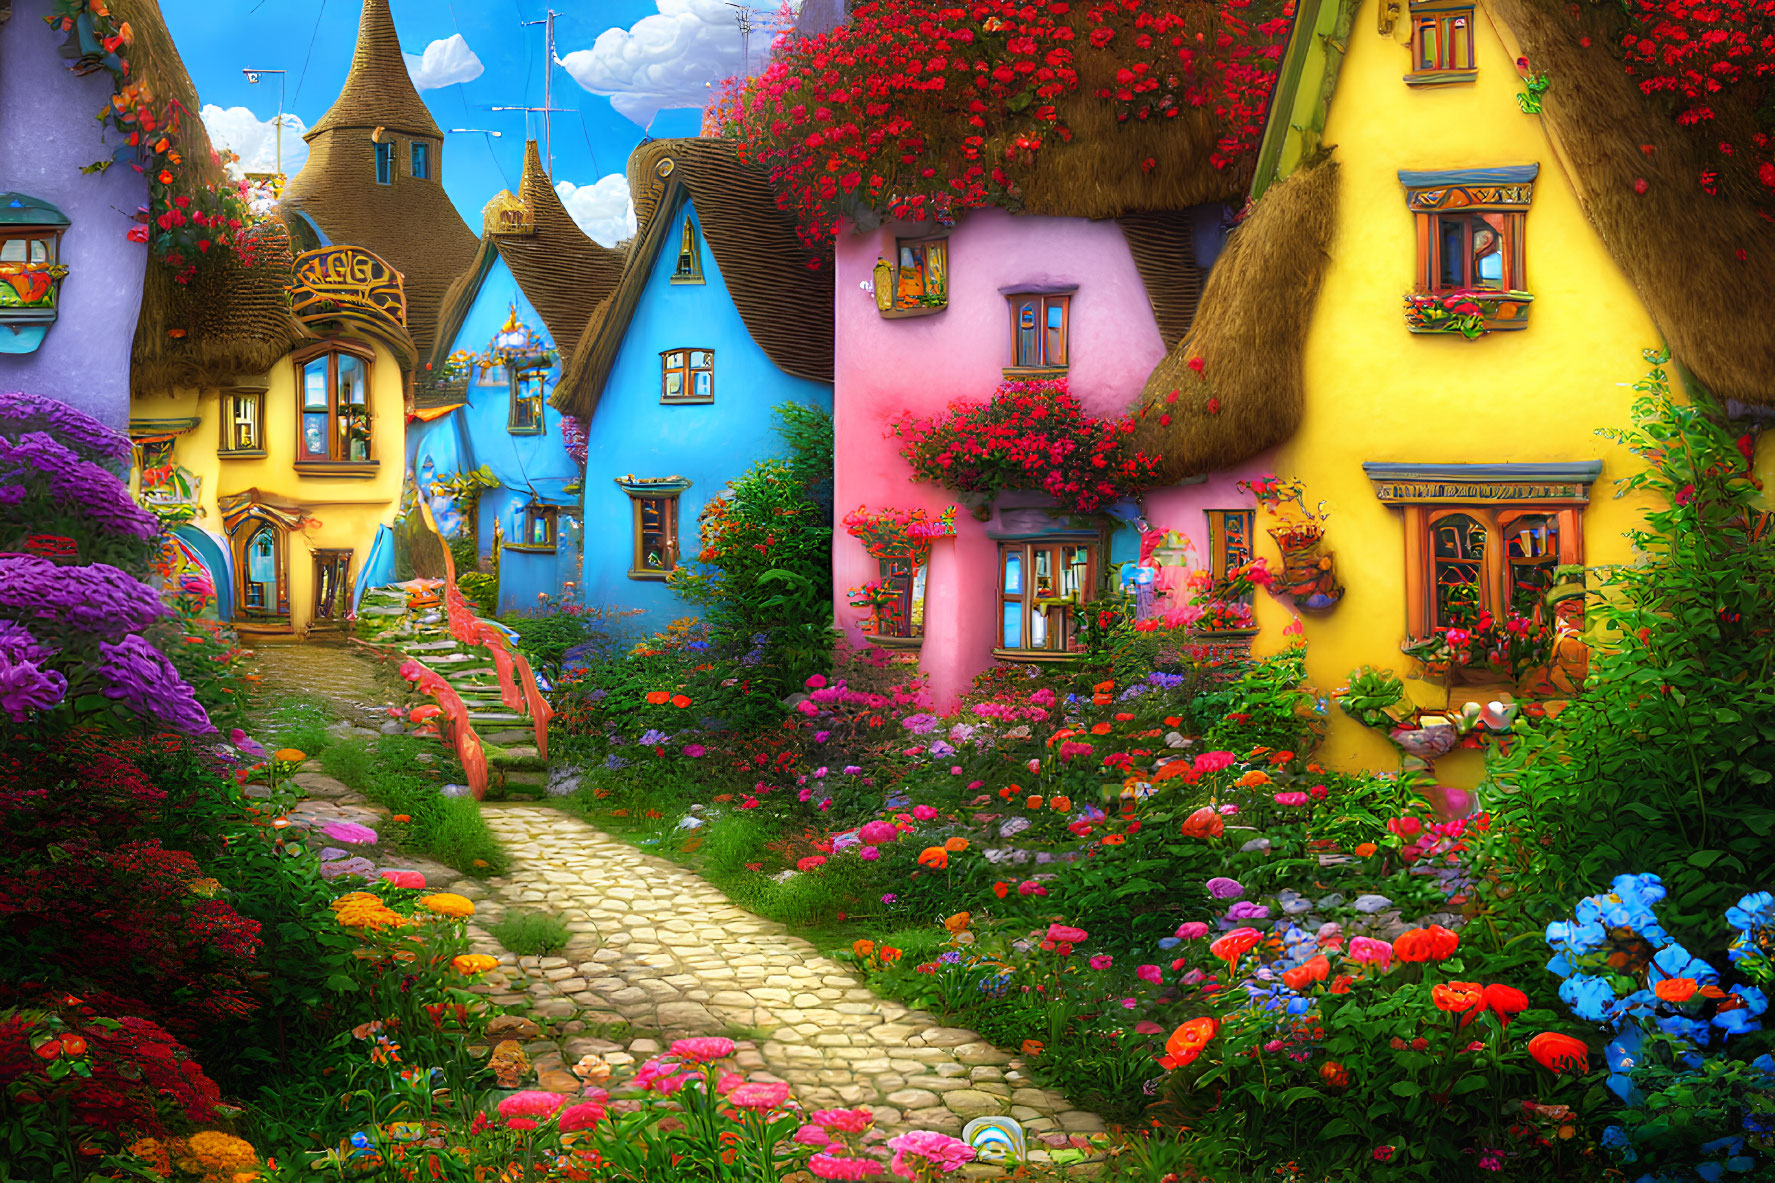 Colorful Thatched-Roof Cottages in Vibrant Fantasy Village